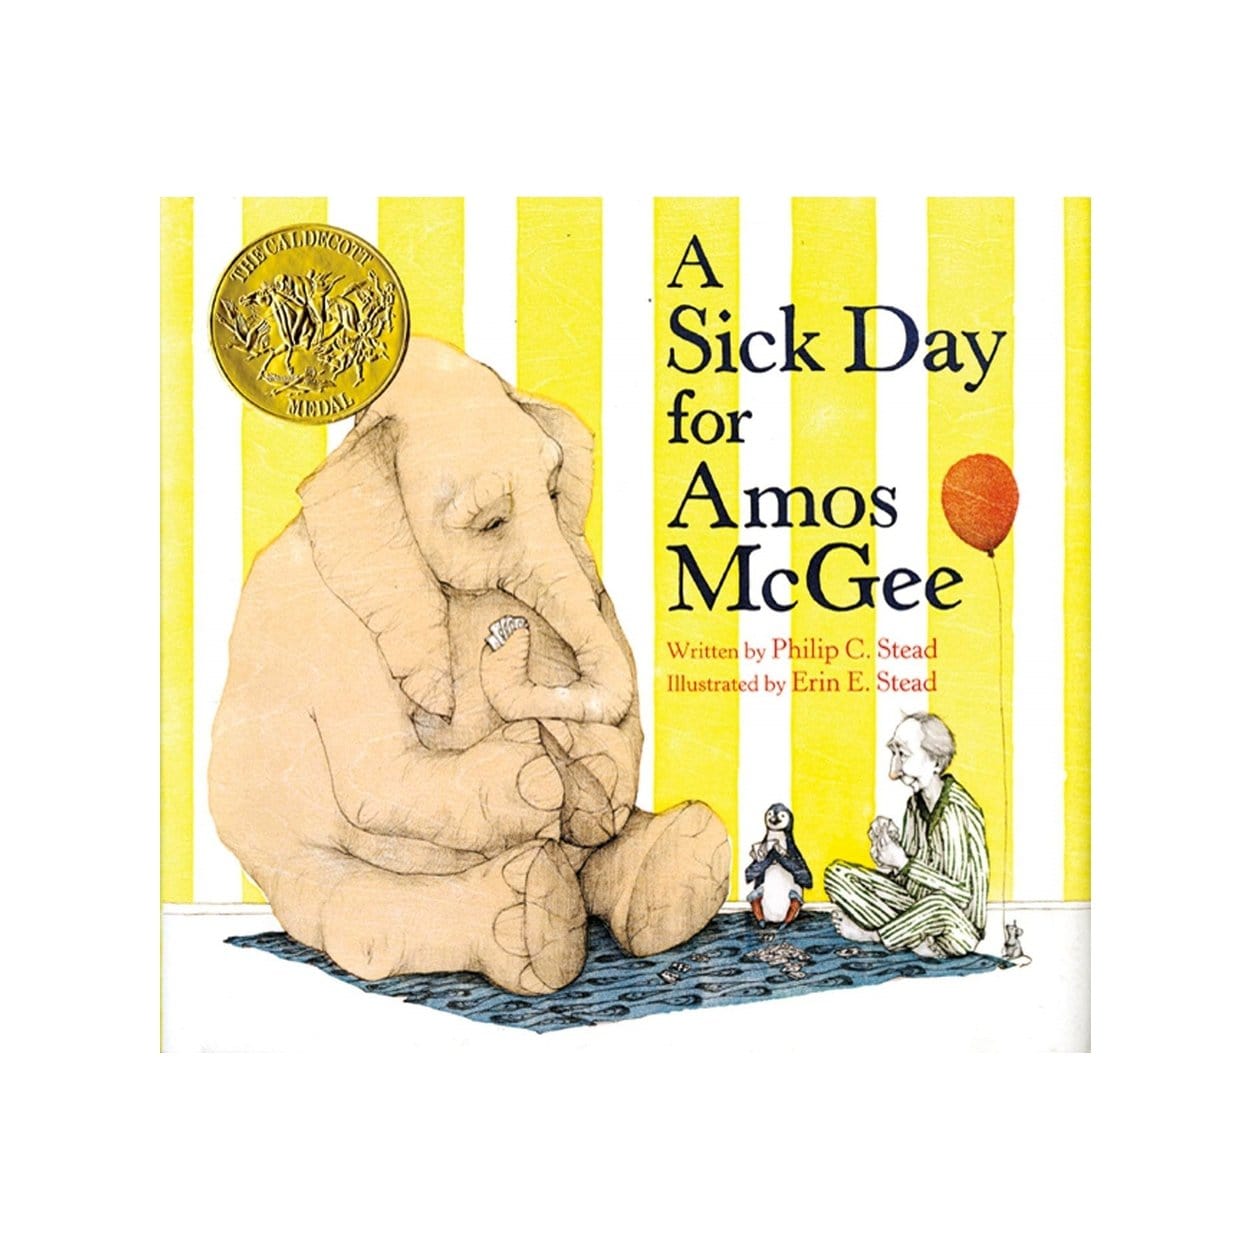 A Sick Day for Amos McGee - The Montessori Room, Philip c stead, Toronto, Ontario, Canada, best books for kids, award winning books for kids, toddler books, books about animals, books with beautiful illustrations, books about friendship, books about kindness, toddler books, children's books